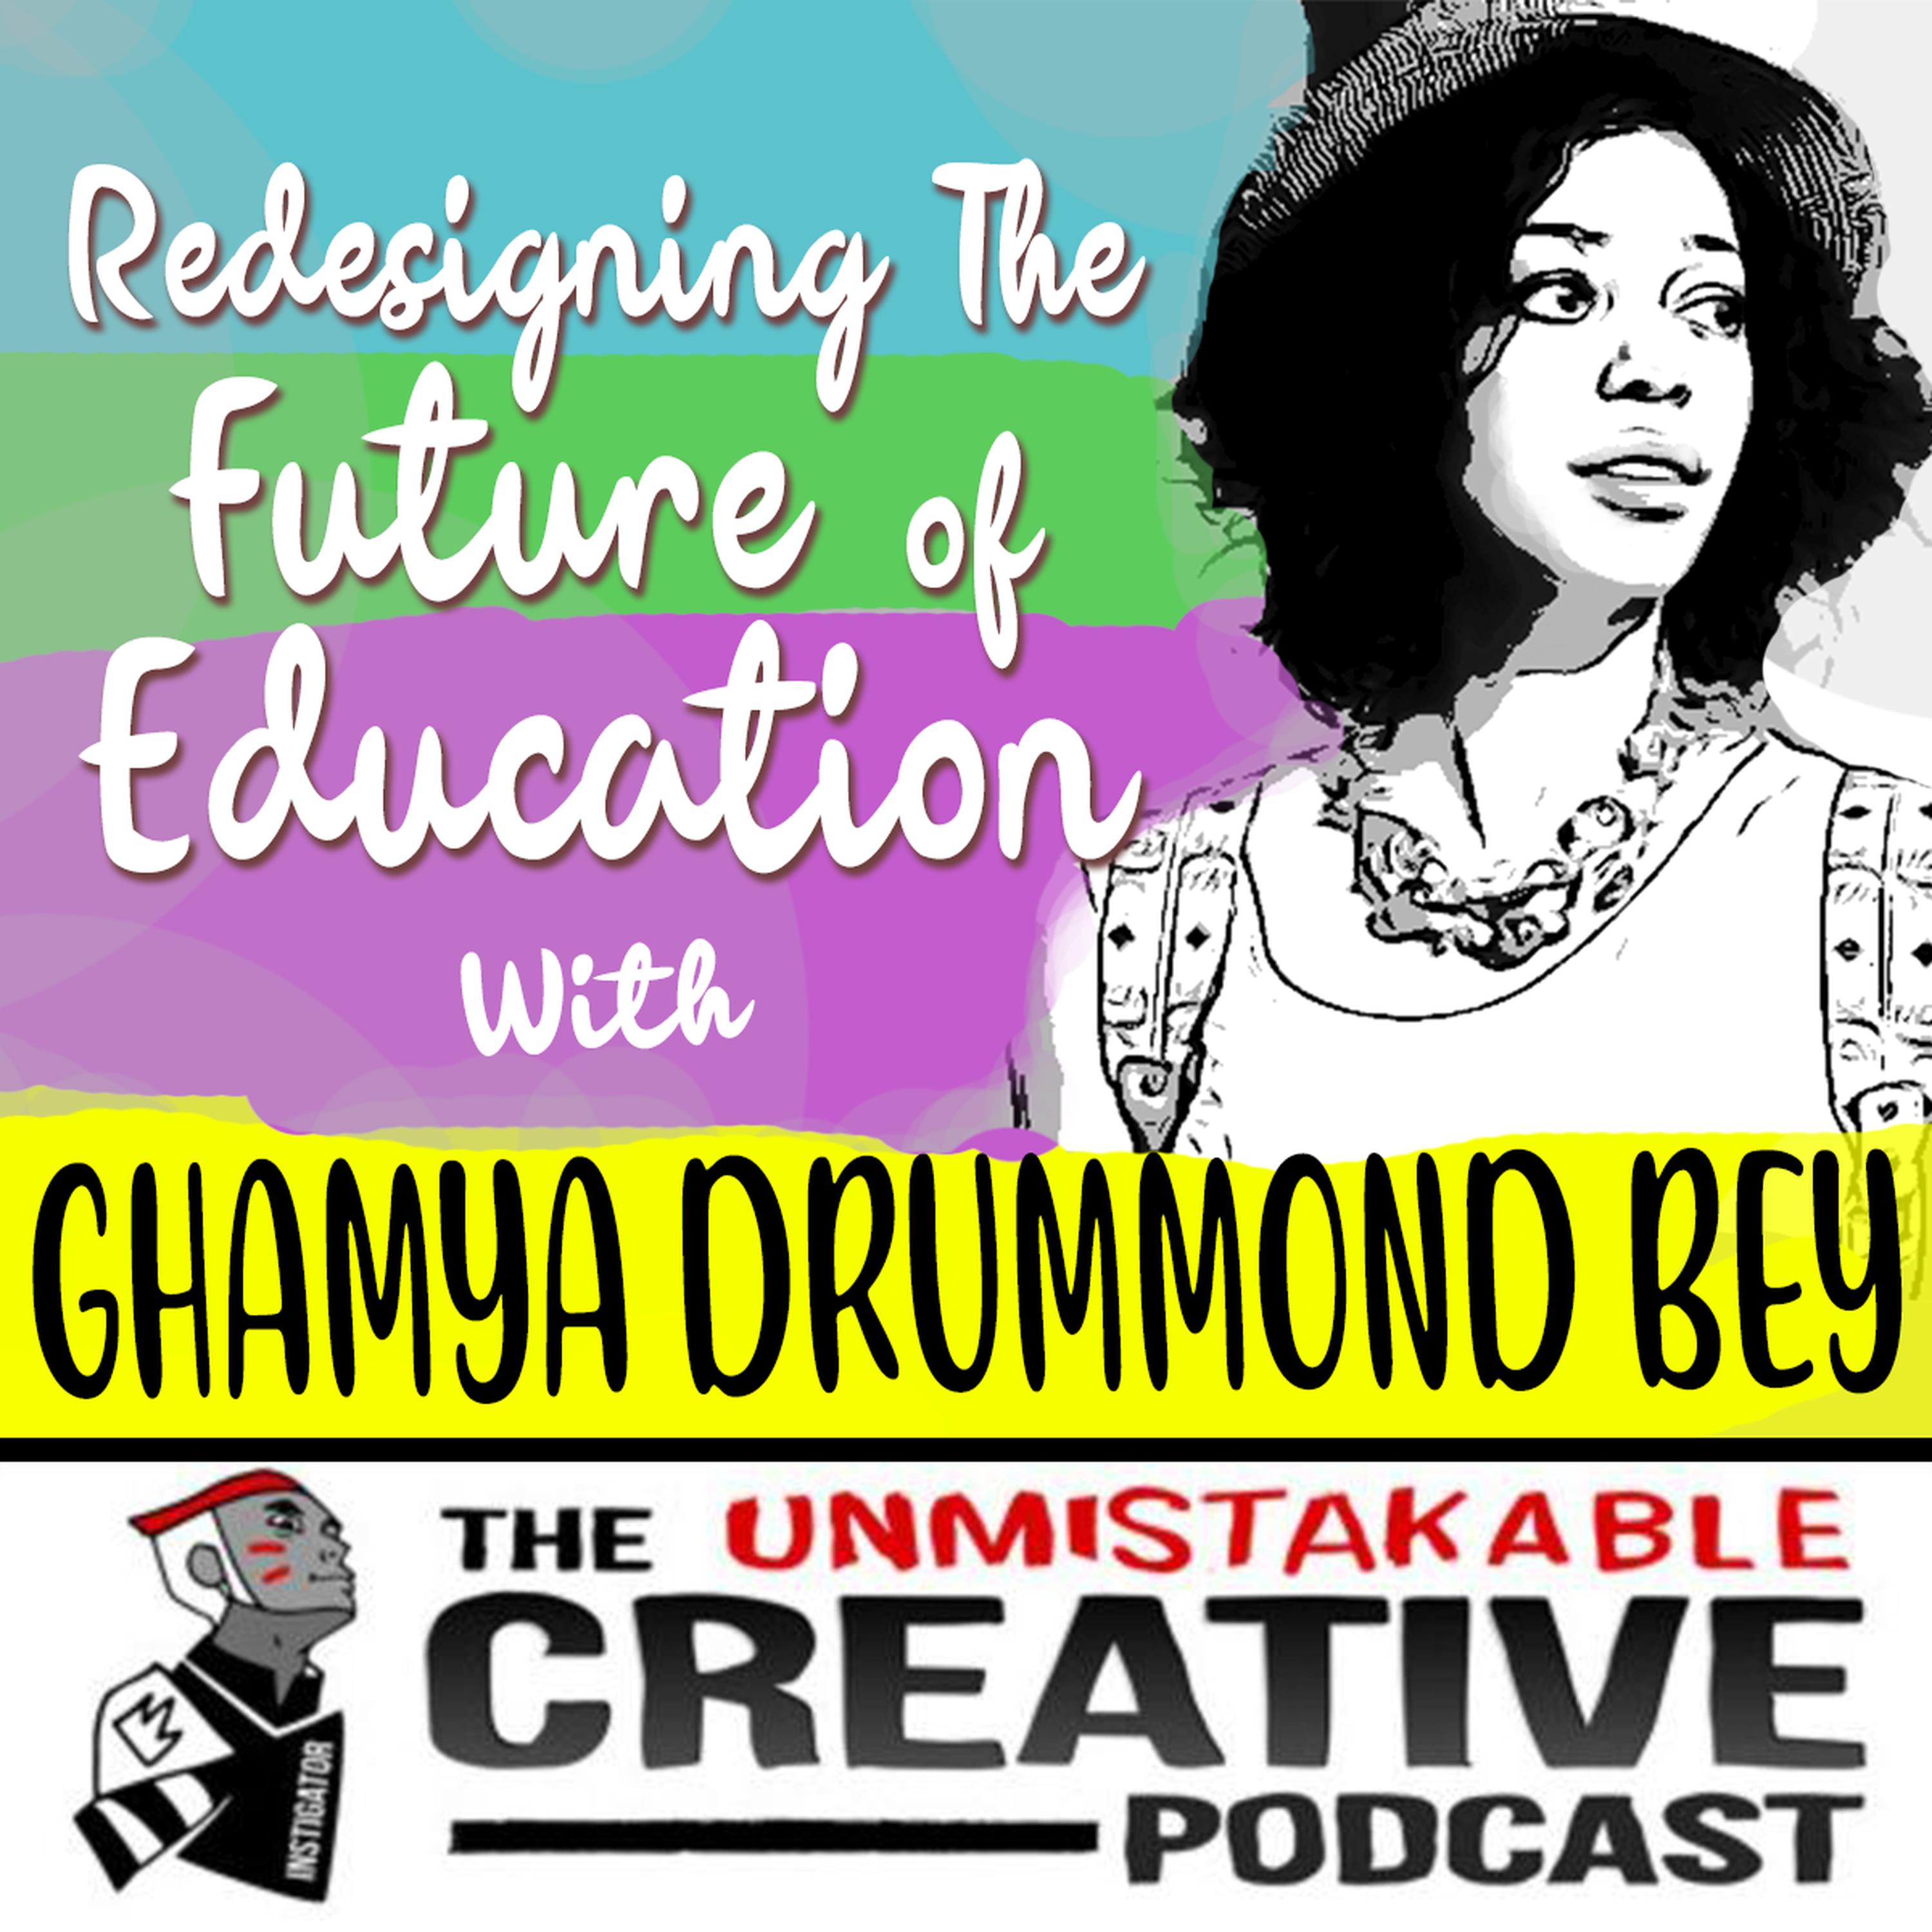 Redesigning The Future of Education with Gahmya Drummond-Bey Image